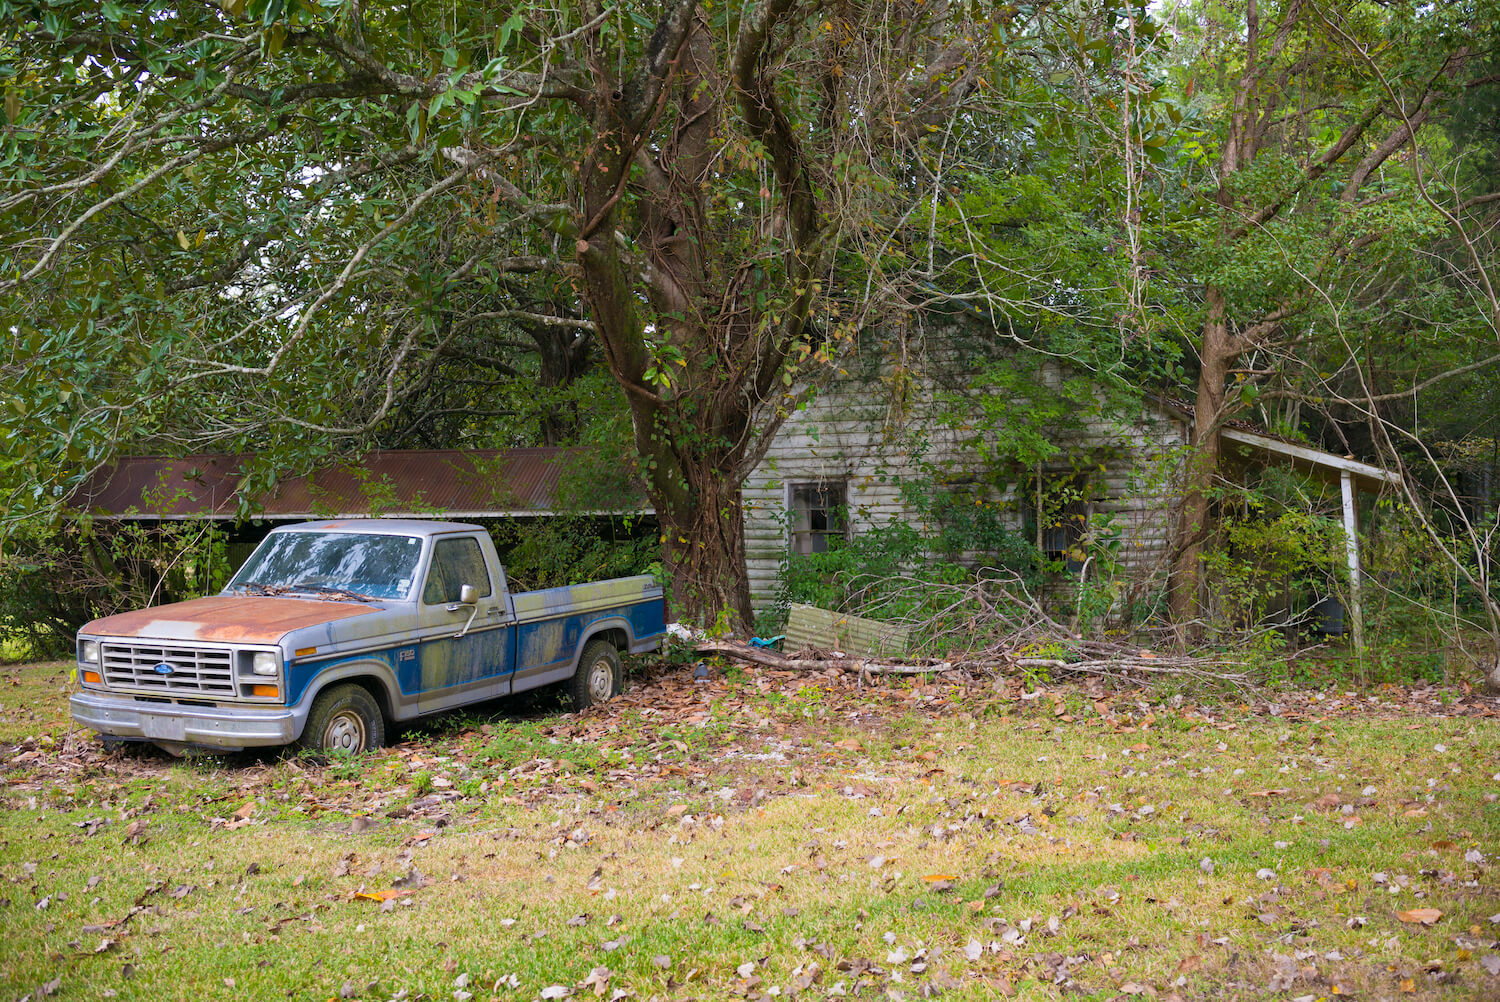 A Ford half-ton diesel pickup truck parked in front of a derelict shack, overgrown with trees.